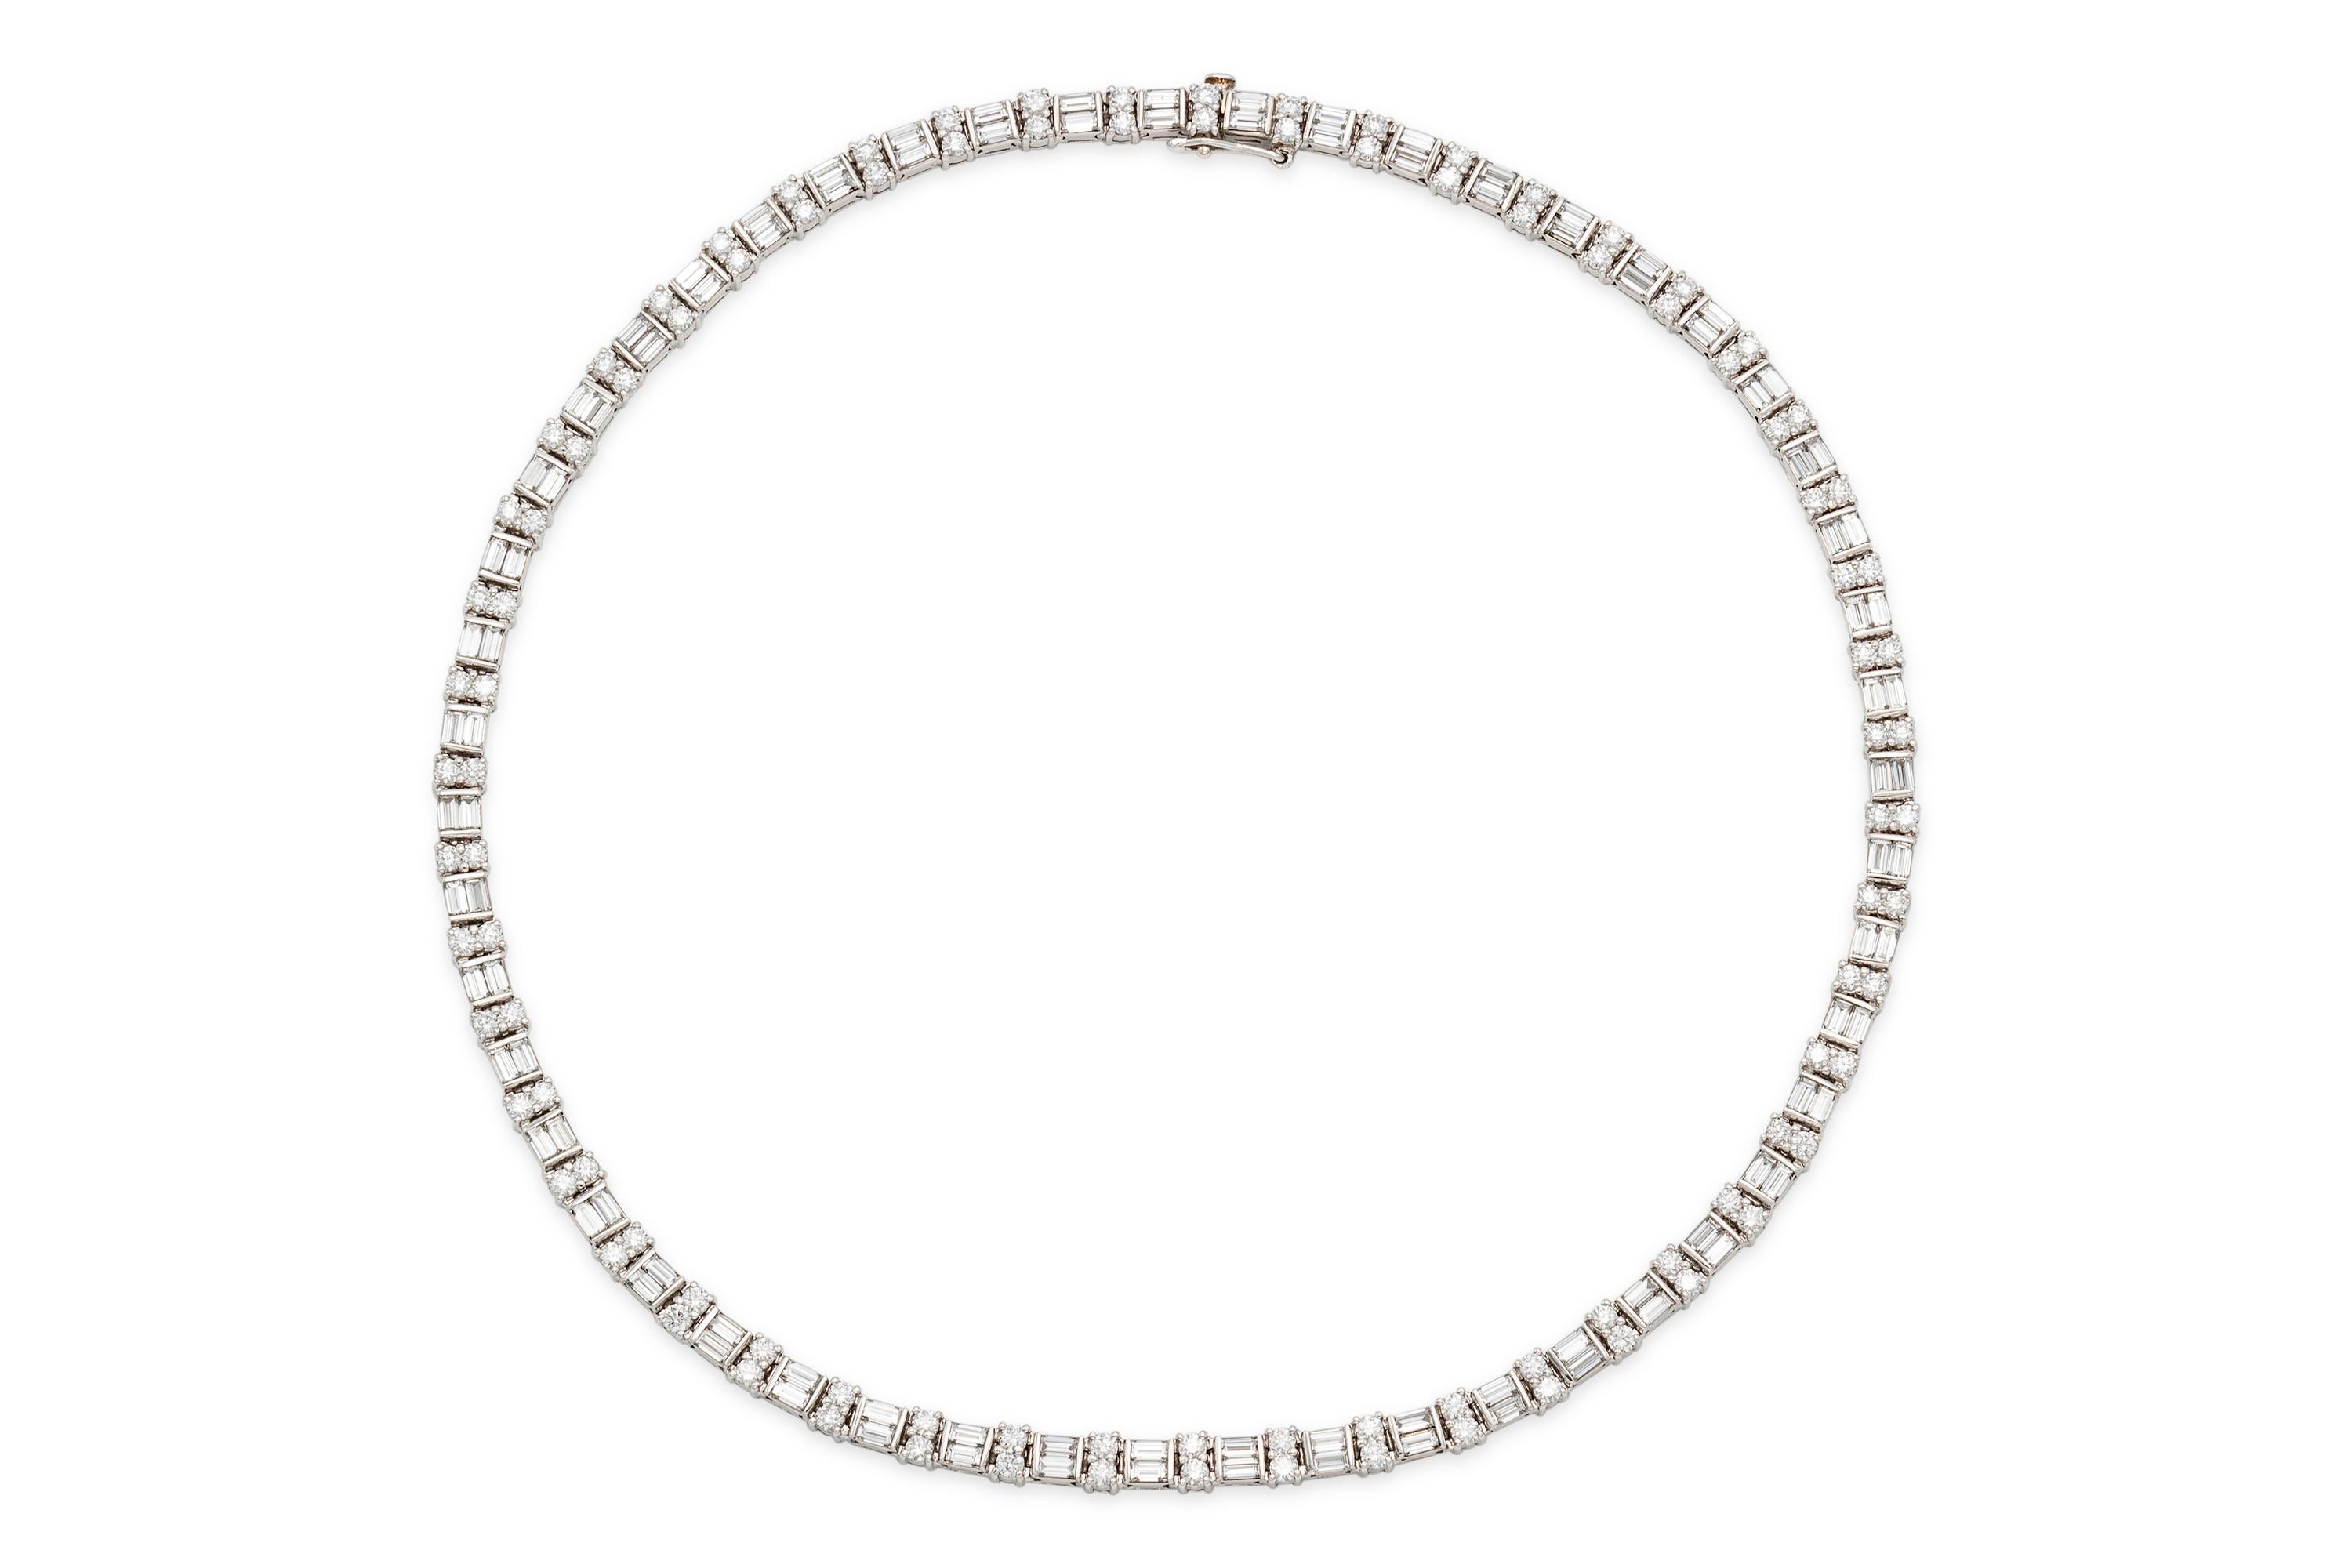 Finely crafted in platinum featuring Round and Baguette cut diamonds weighing a total of approximately 16.00 carats.
16.5 inches long